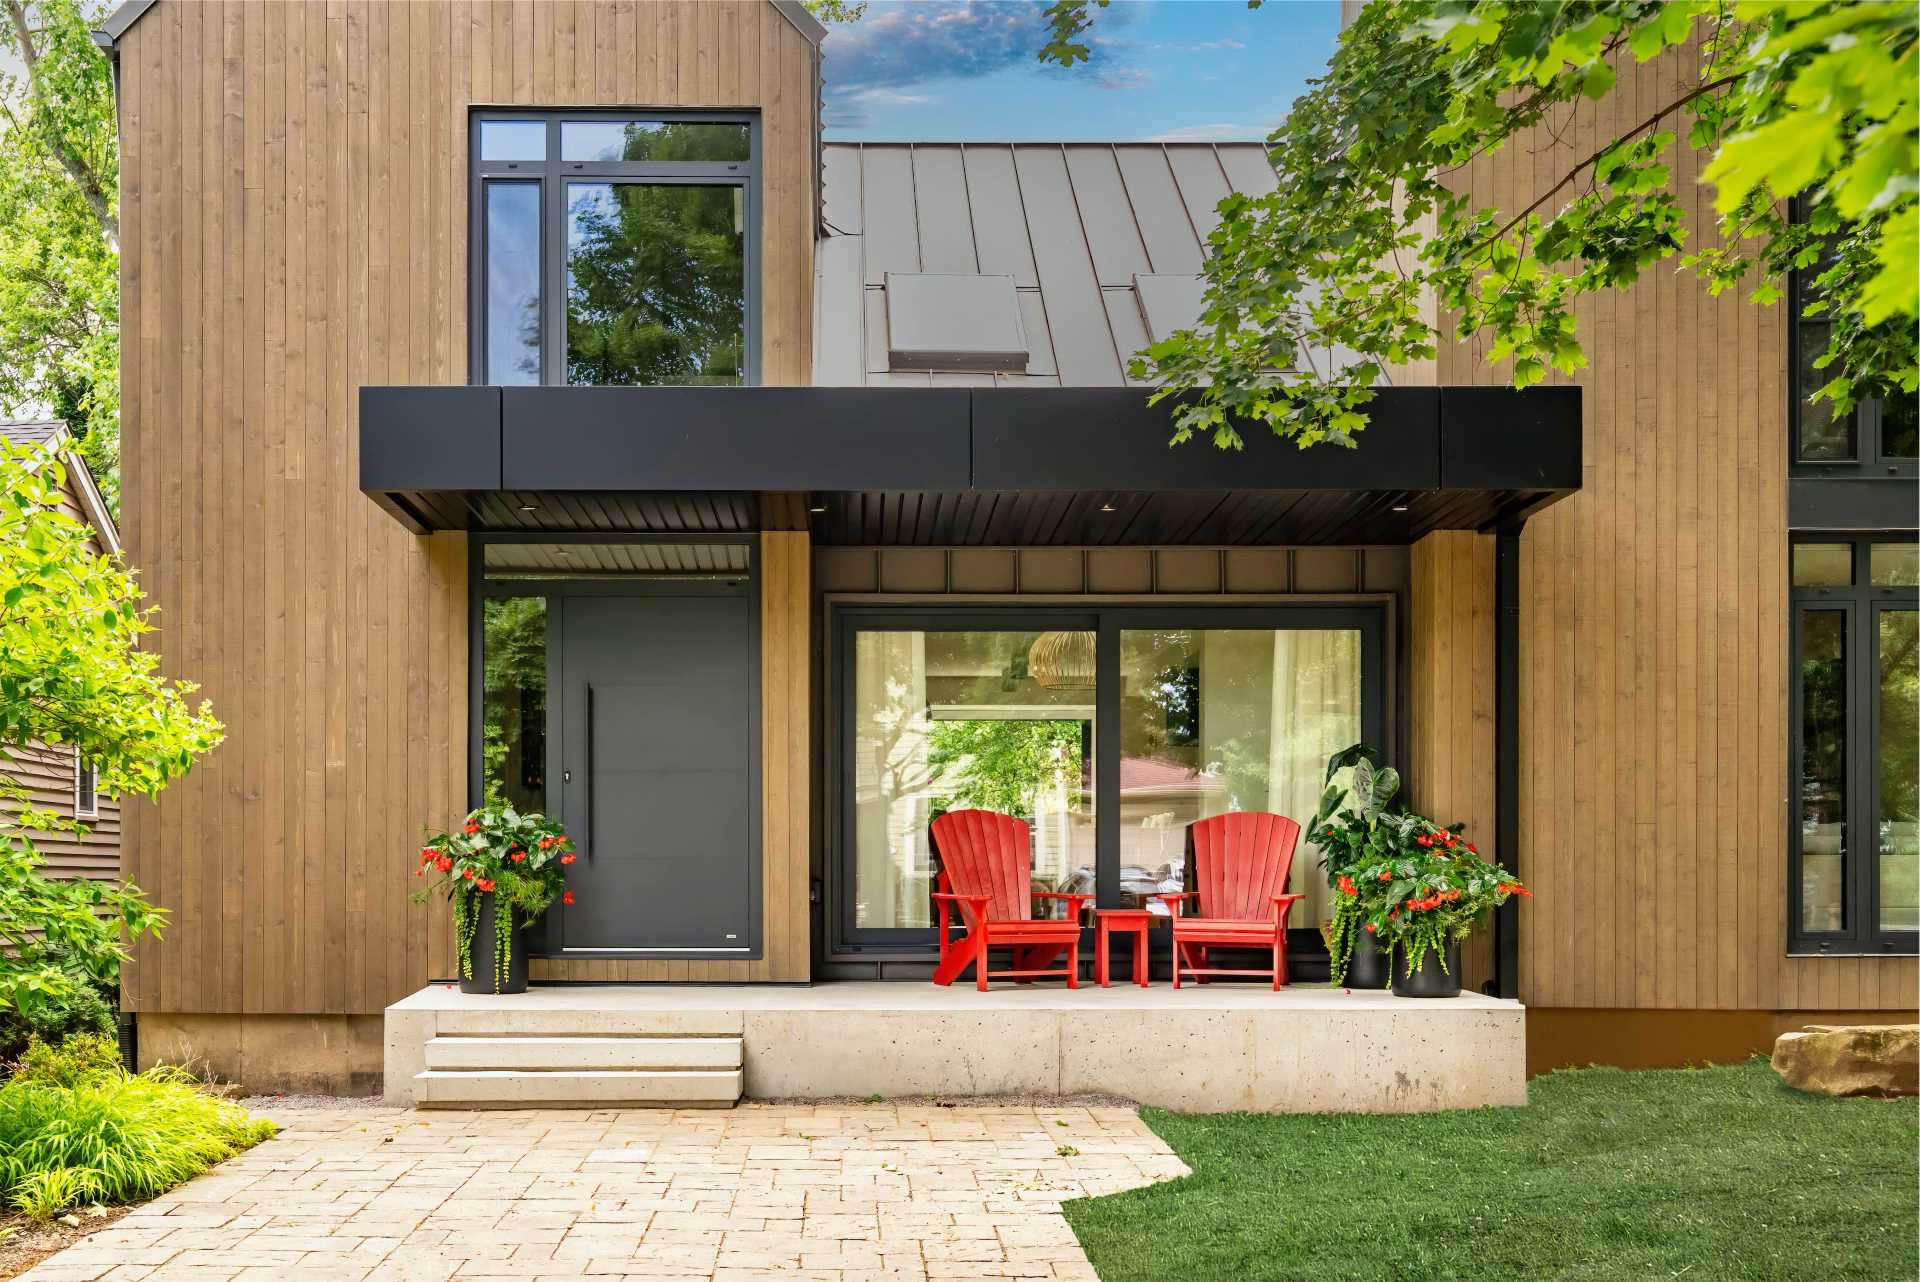 This 1980s ،me was transformed to include Scandinavian influence externally, and playful sophistication within, while neutral wood tones found in the vertical exterior siding, creates an intimate connection with its scenic lakeside locale.